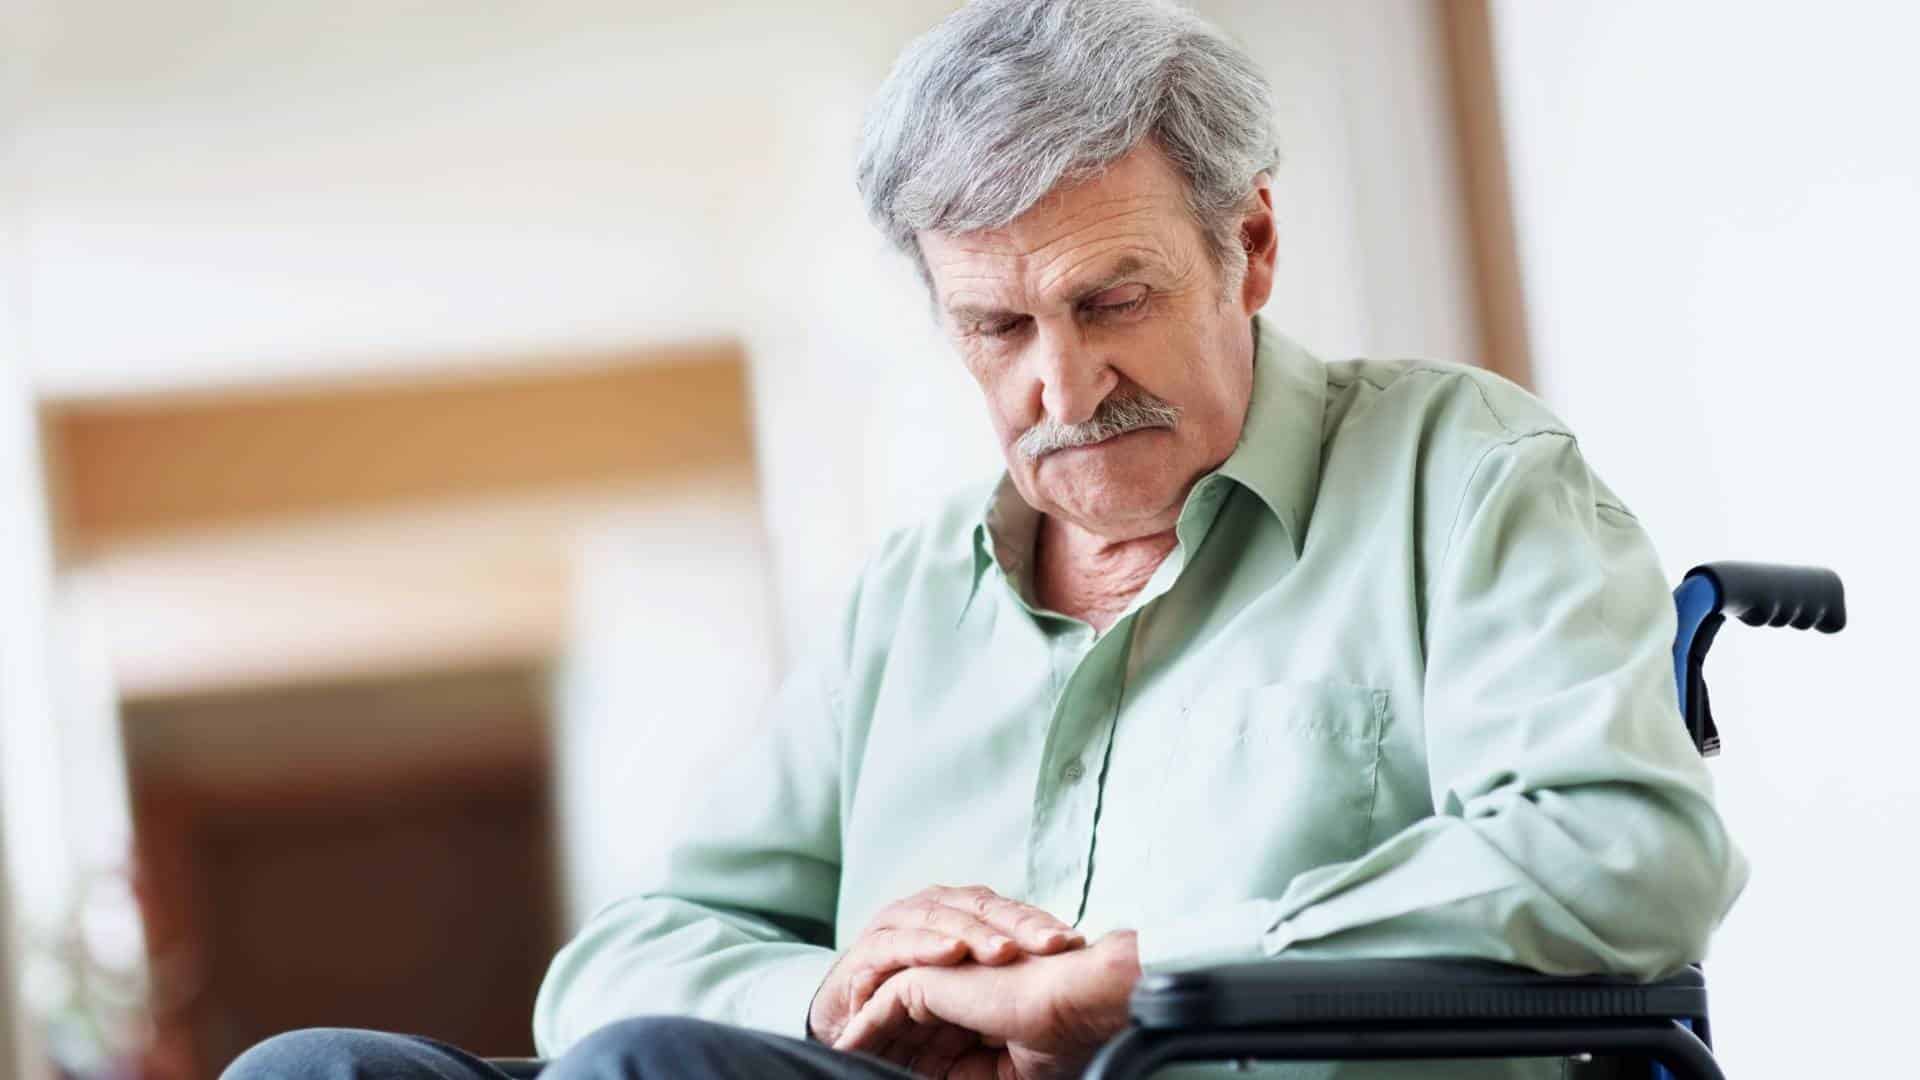 warning signs to seek professional help for the mental health needs of the elderly